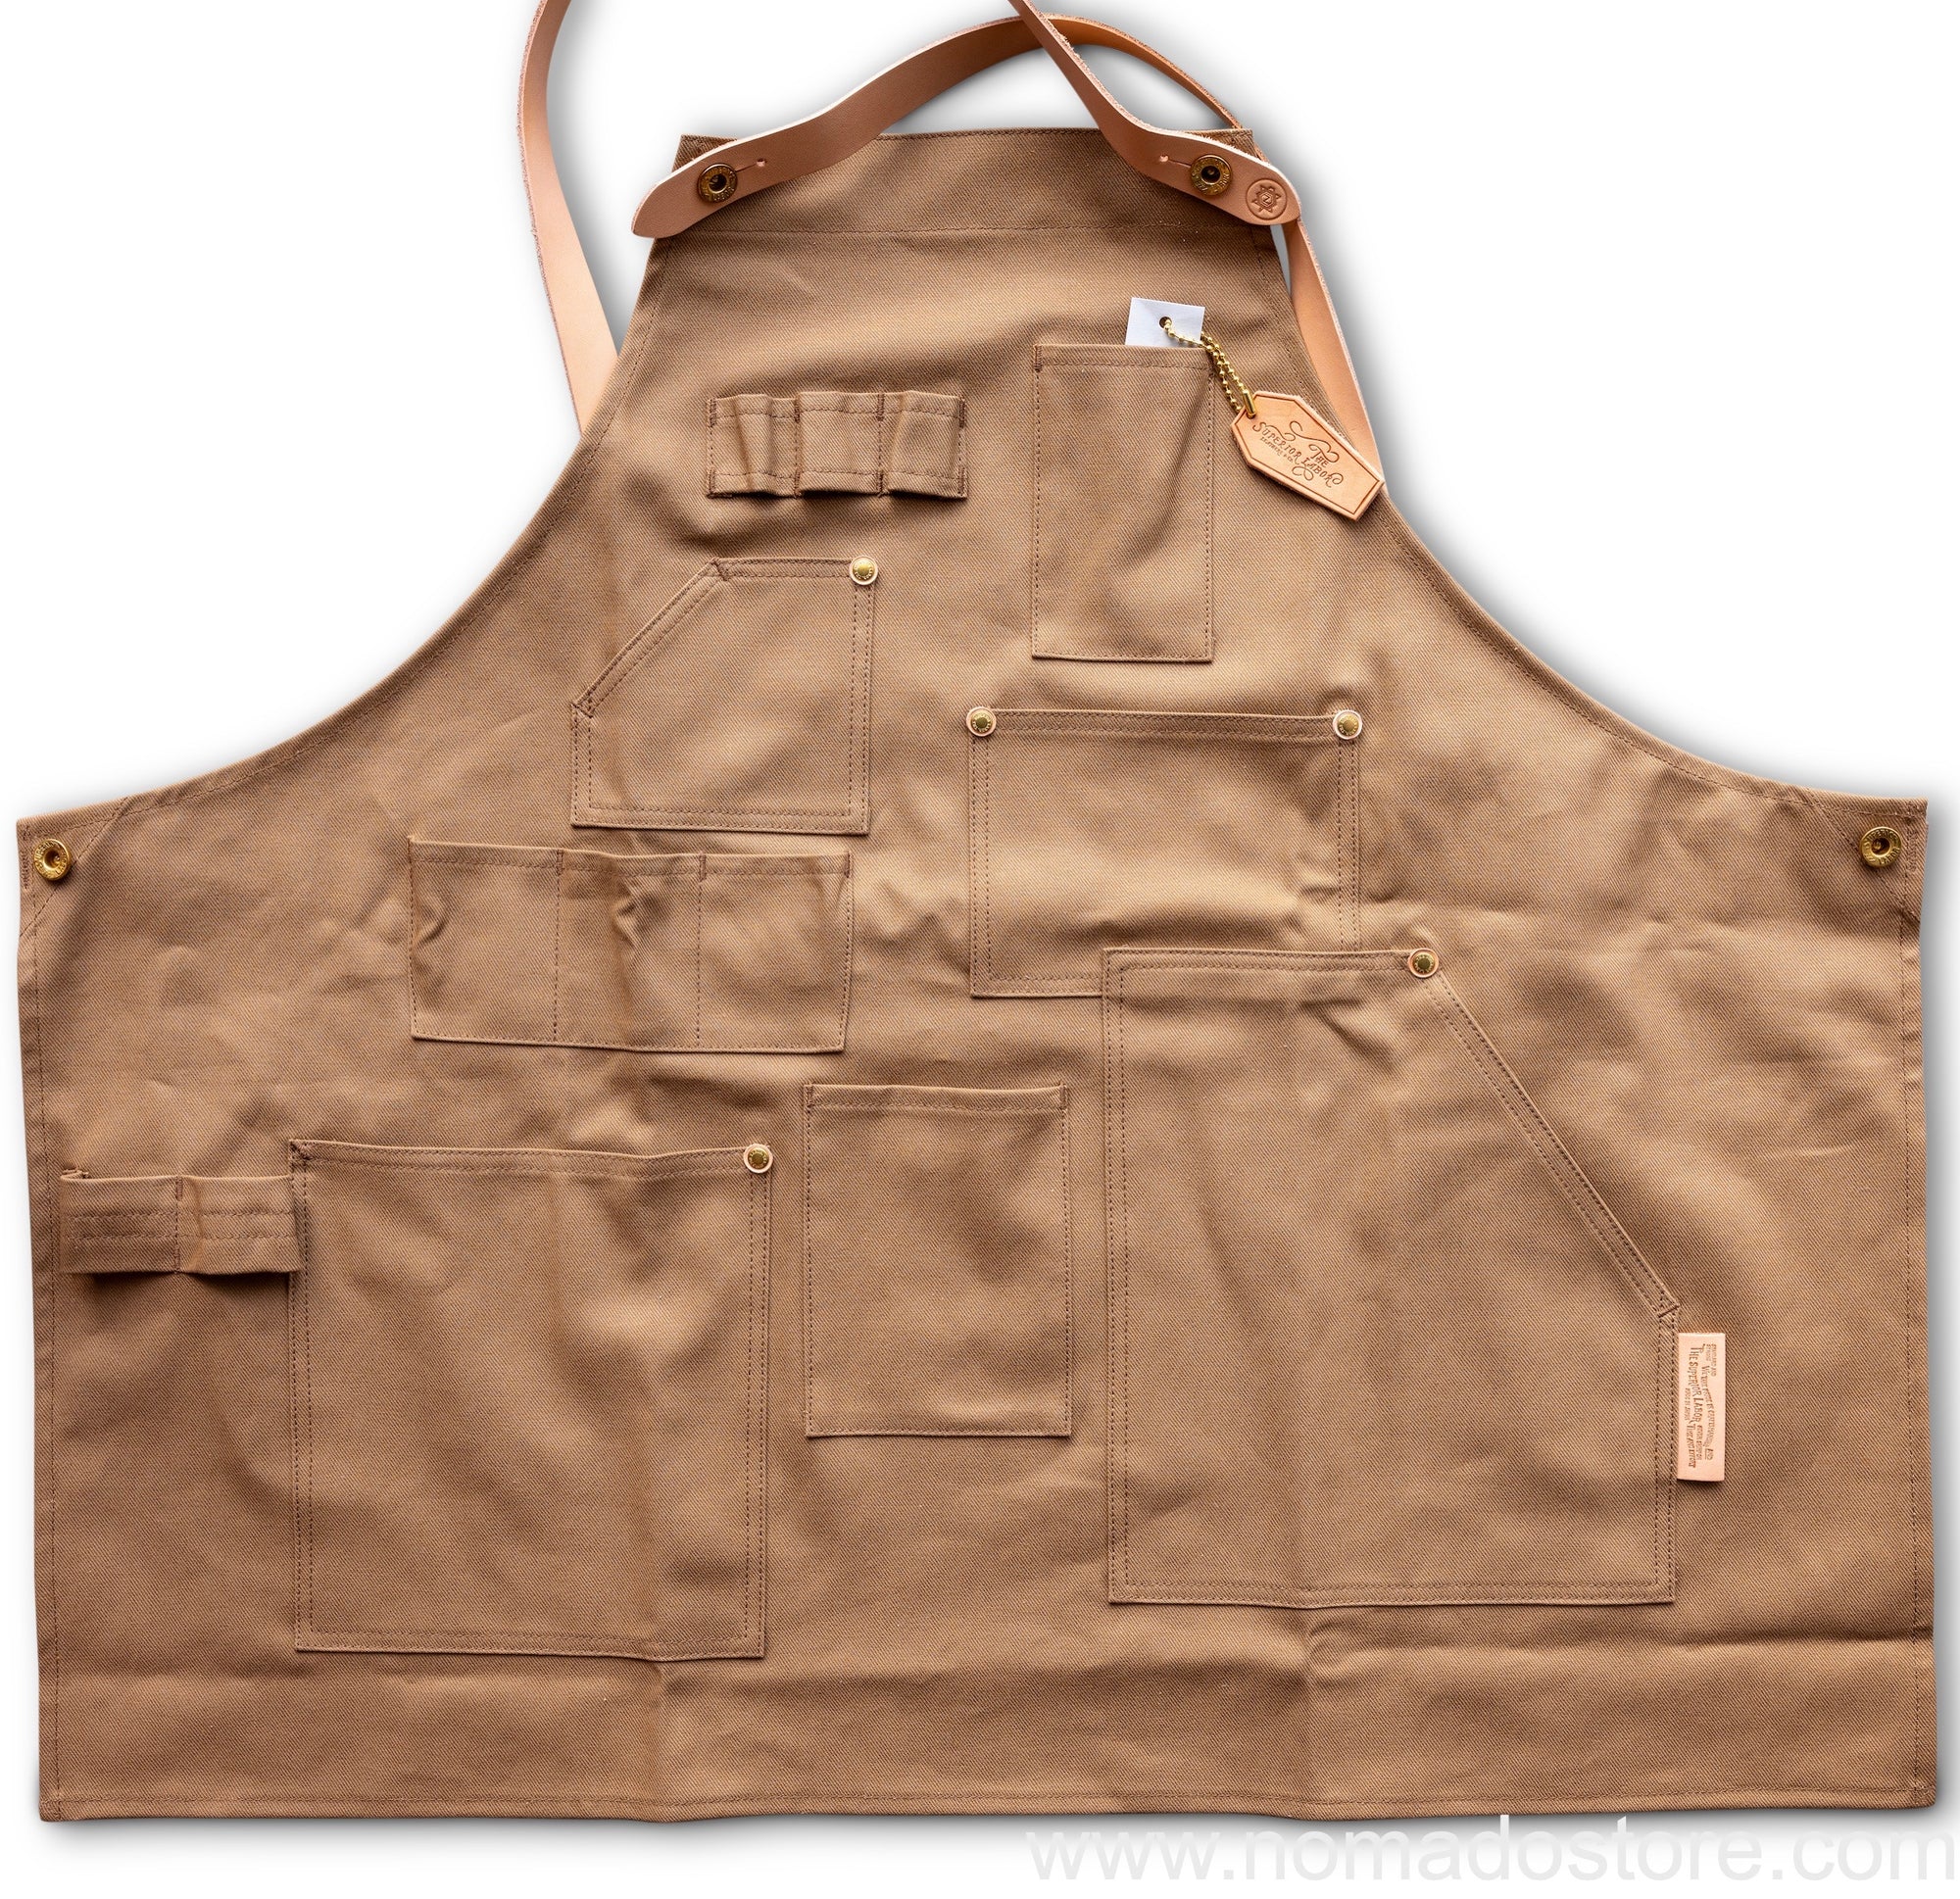 The Superior Labor "Too Much" Apron SE (2 Colours)